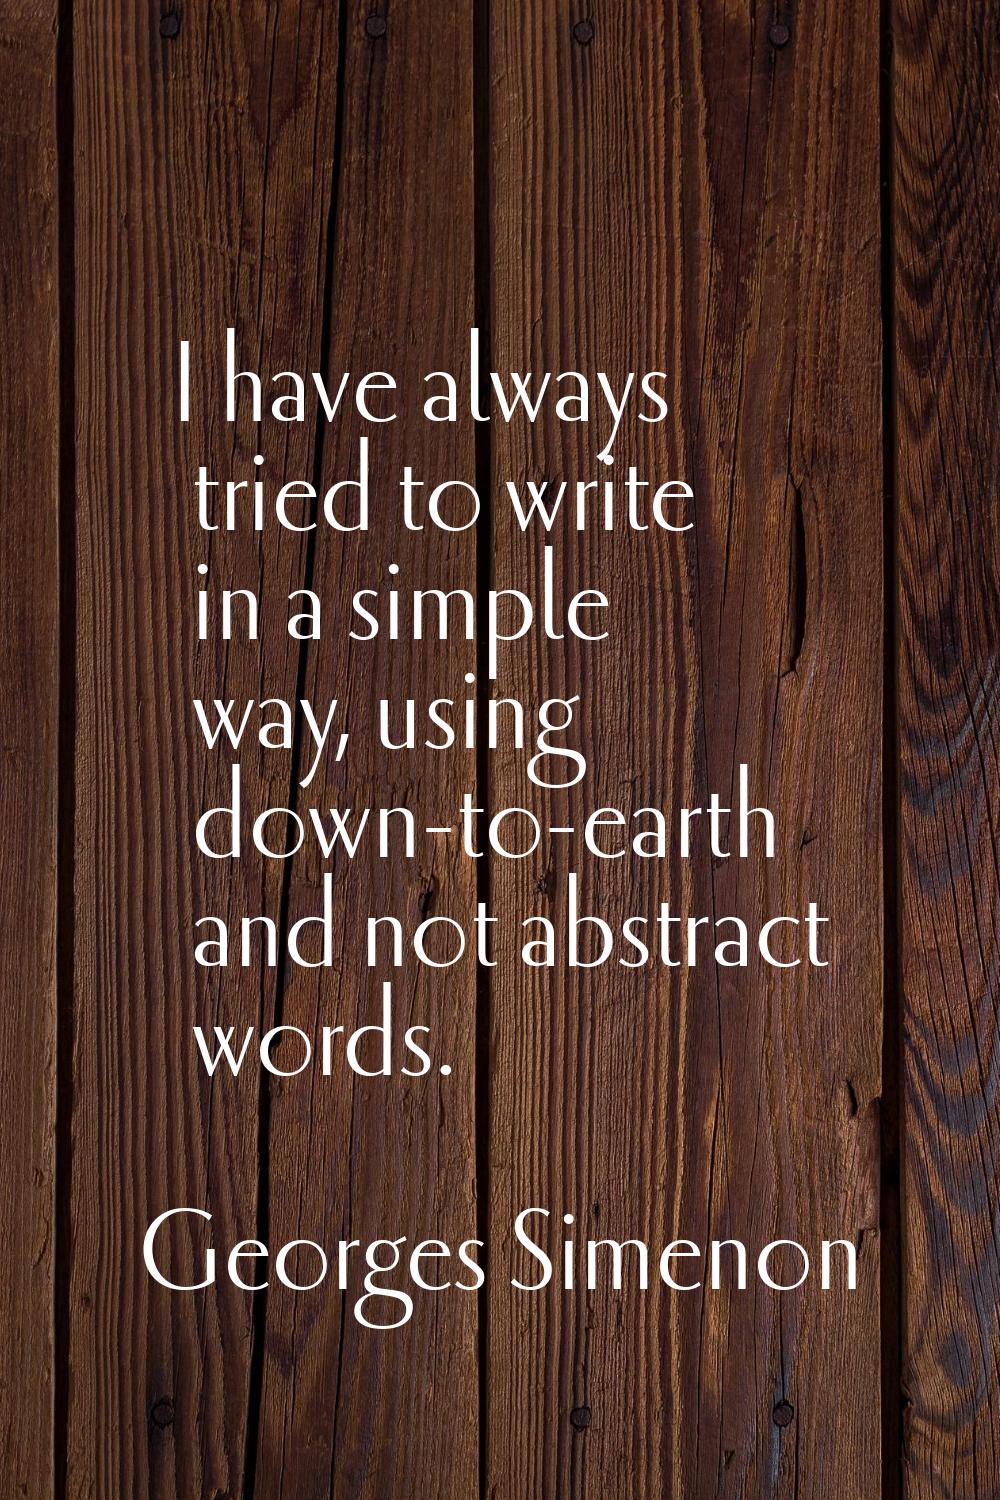 I have always tried to write in a simple way, using down-to-earth and not abstract words.